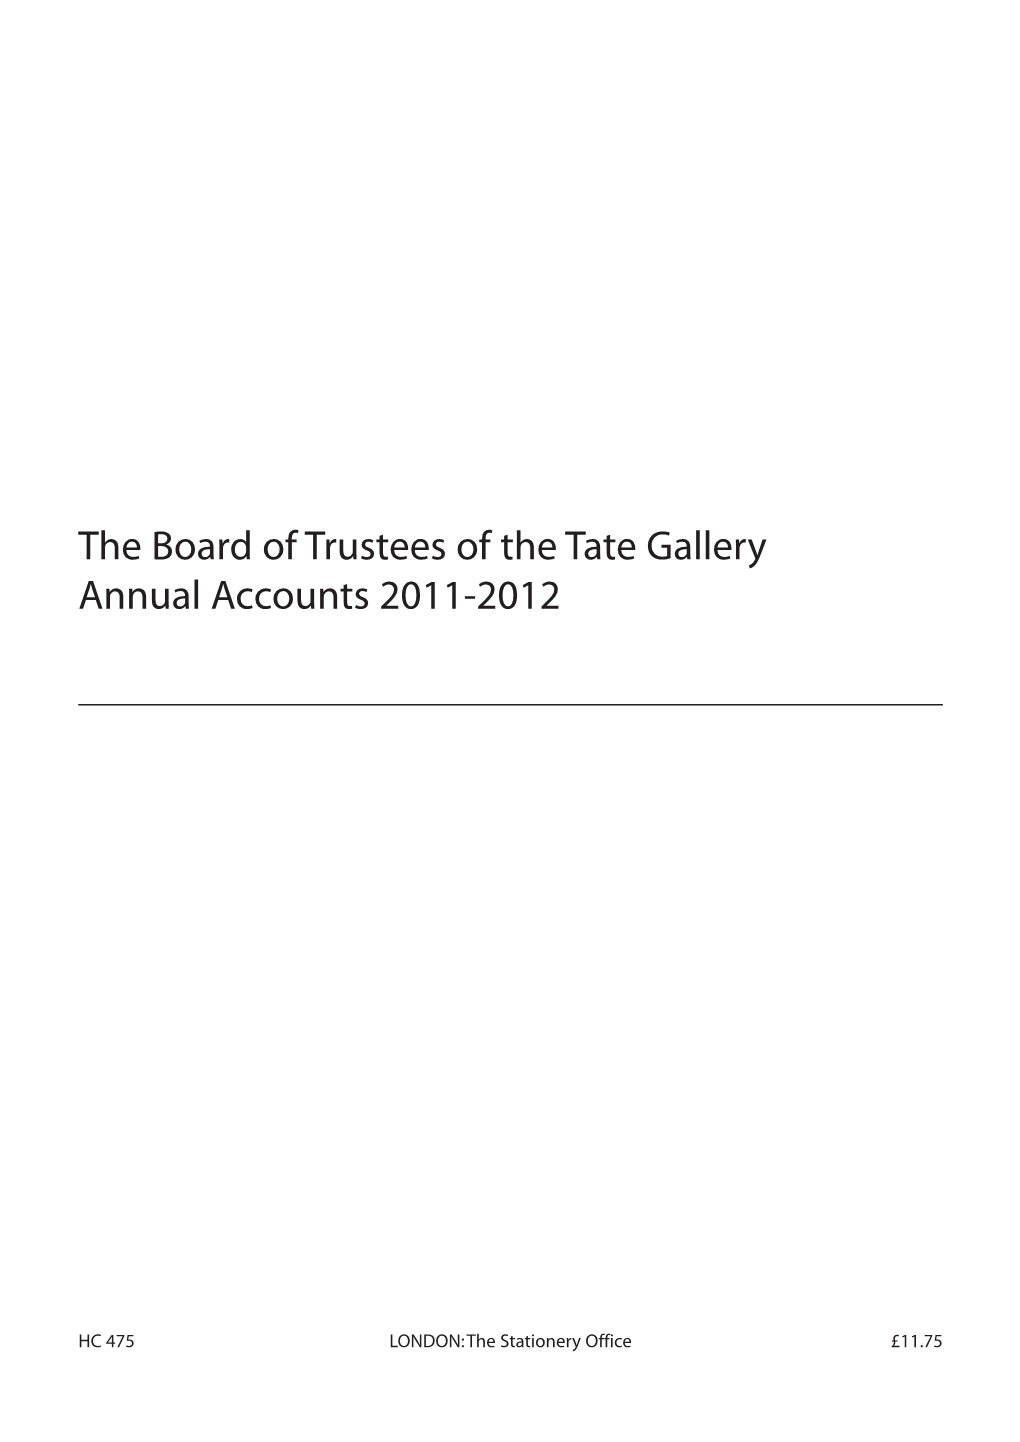 The Board of Trustees of the Tate Gallery Annual Accounts 2011-2012